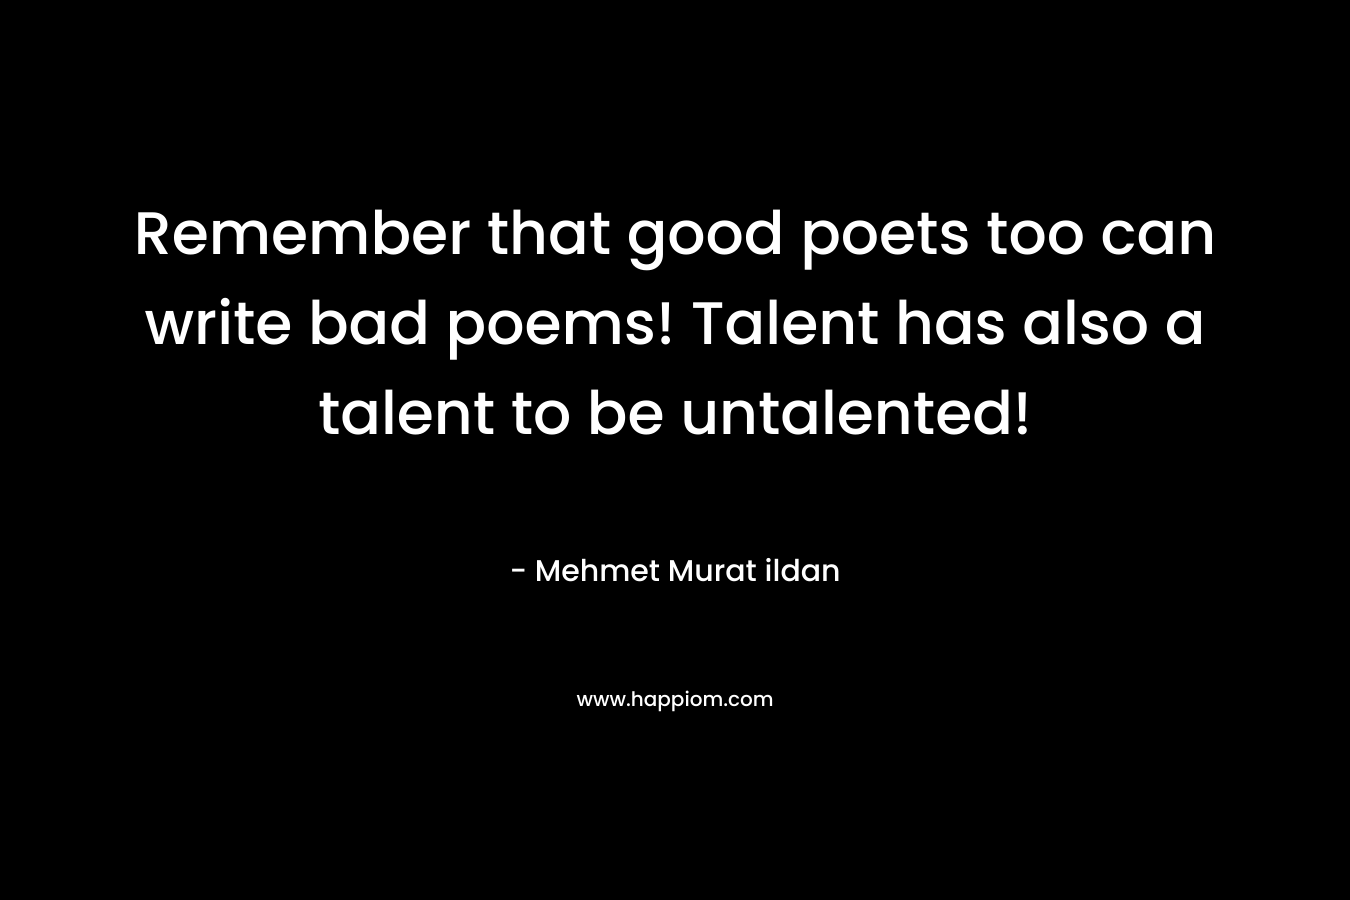 Remember that good poets too can write bad poems! Talent has also a talent to be untalented! – Mehmet Murat ildan